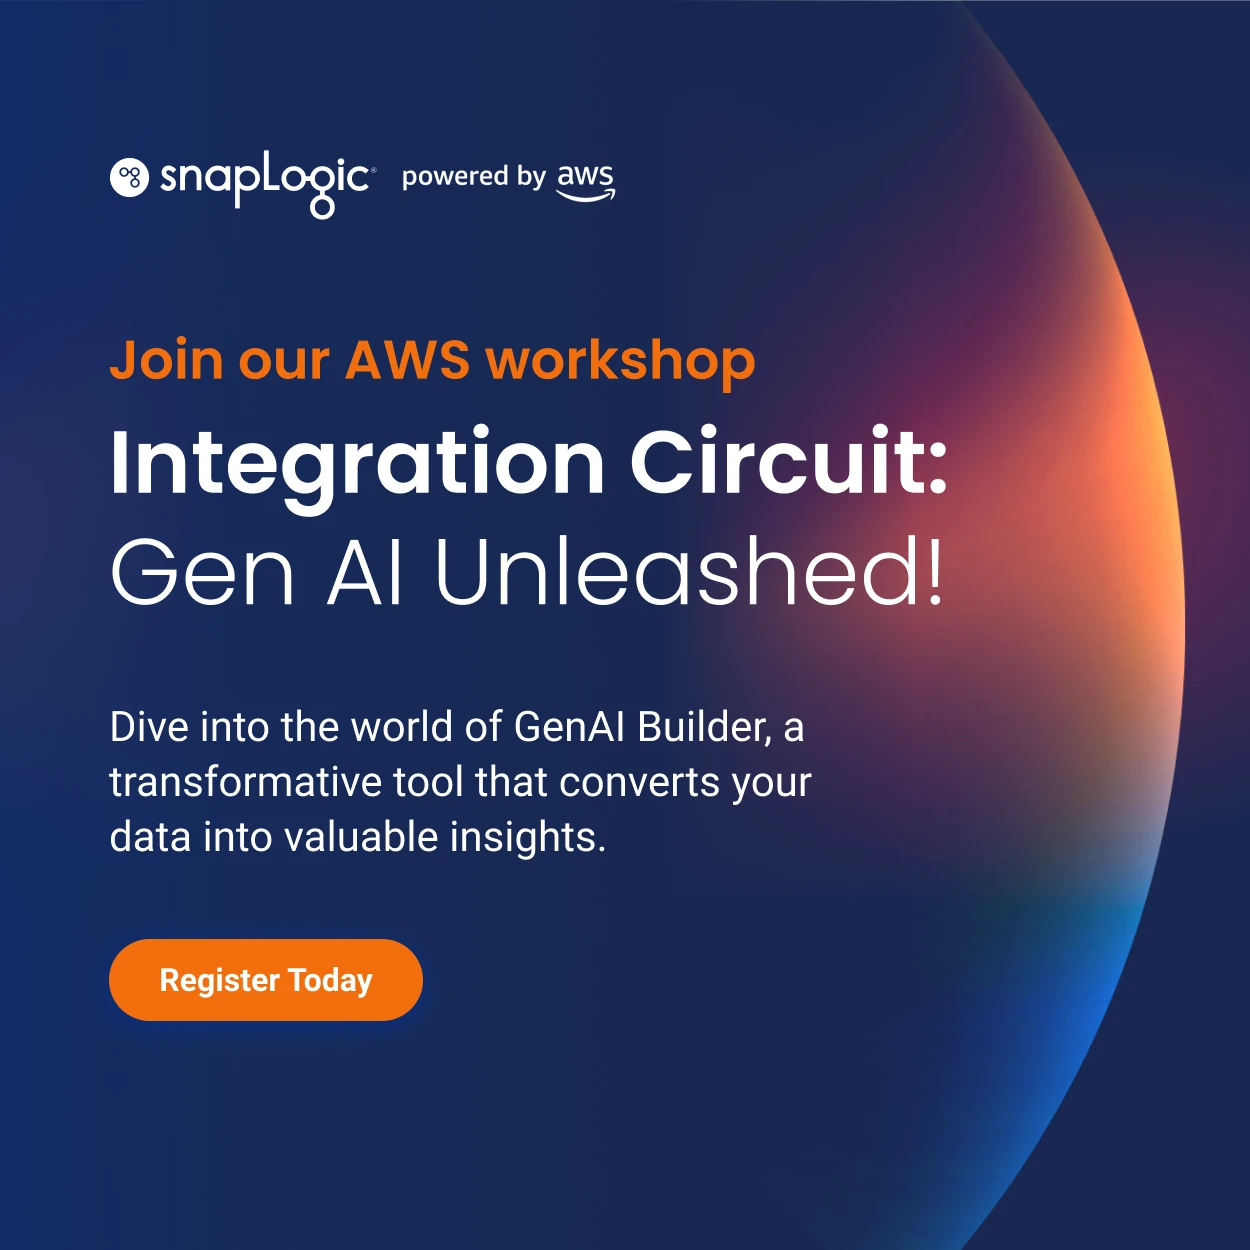 Integration Circuit: Gen AI Unleashed workshop with AWS and SnapLogic